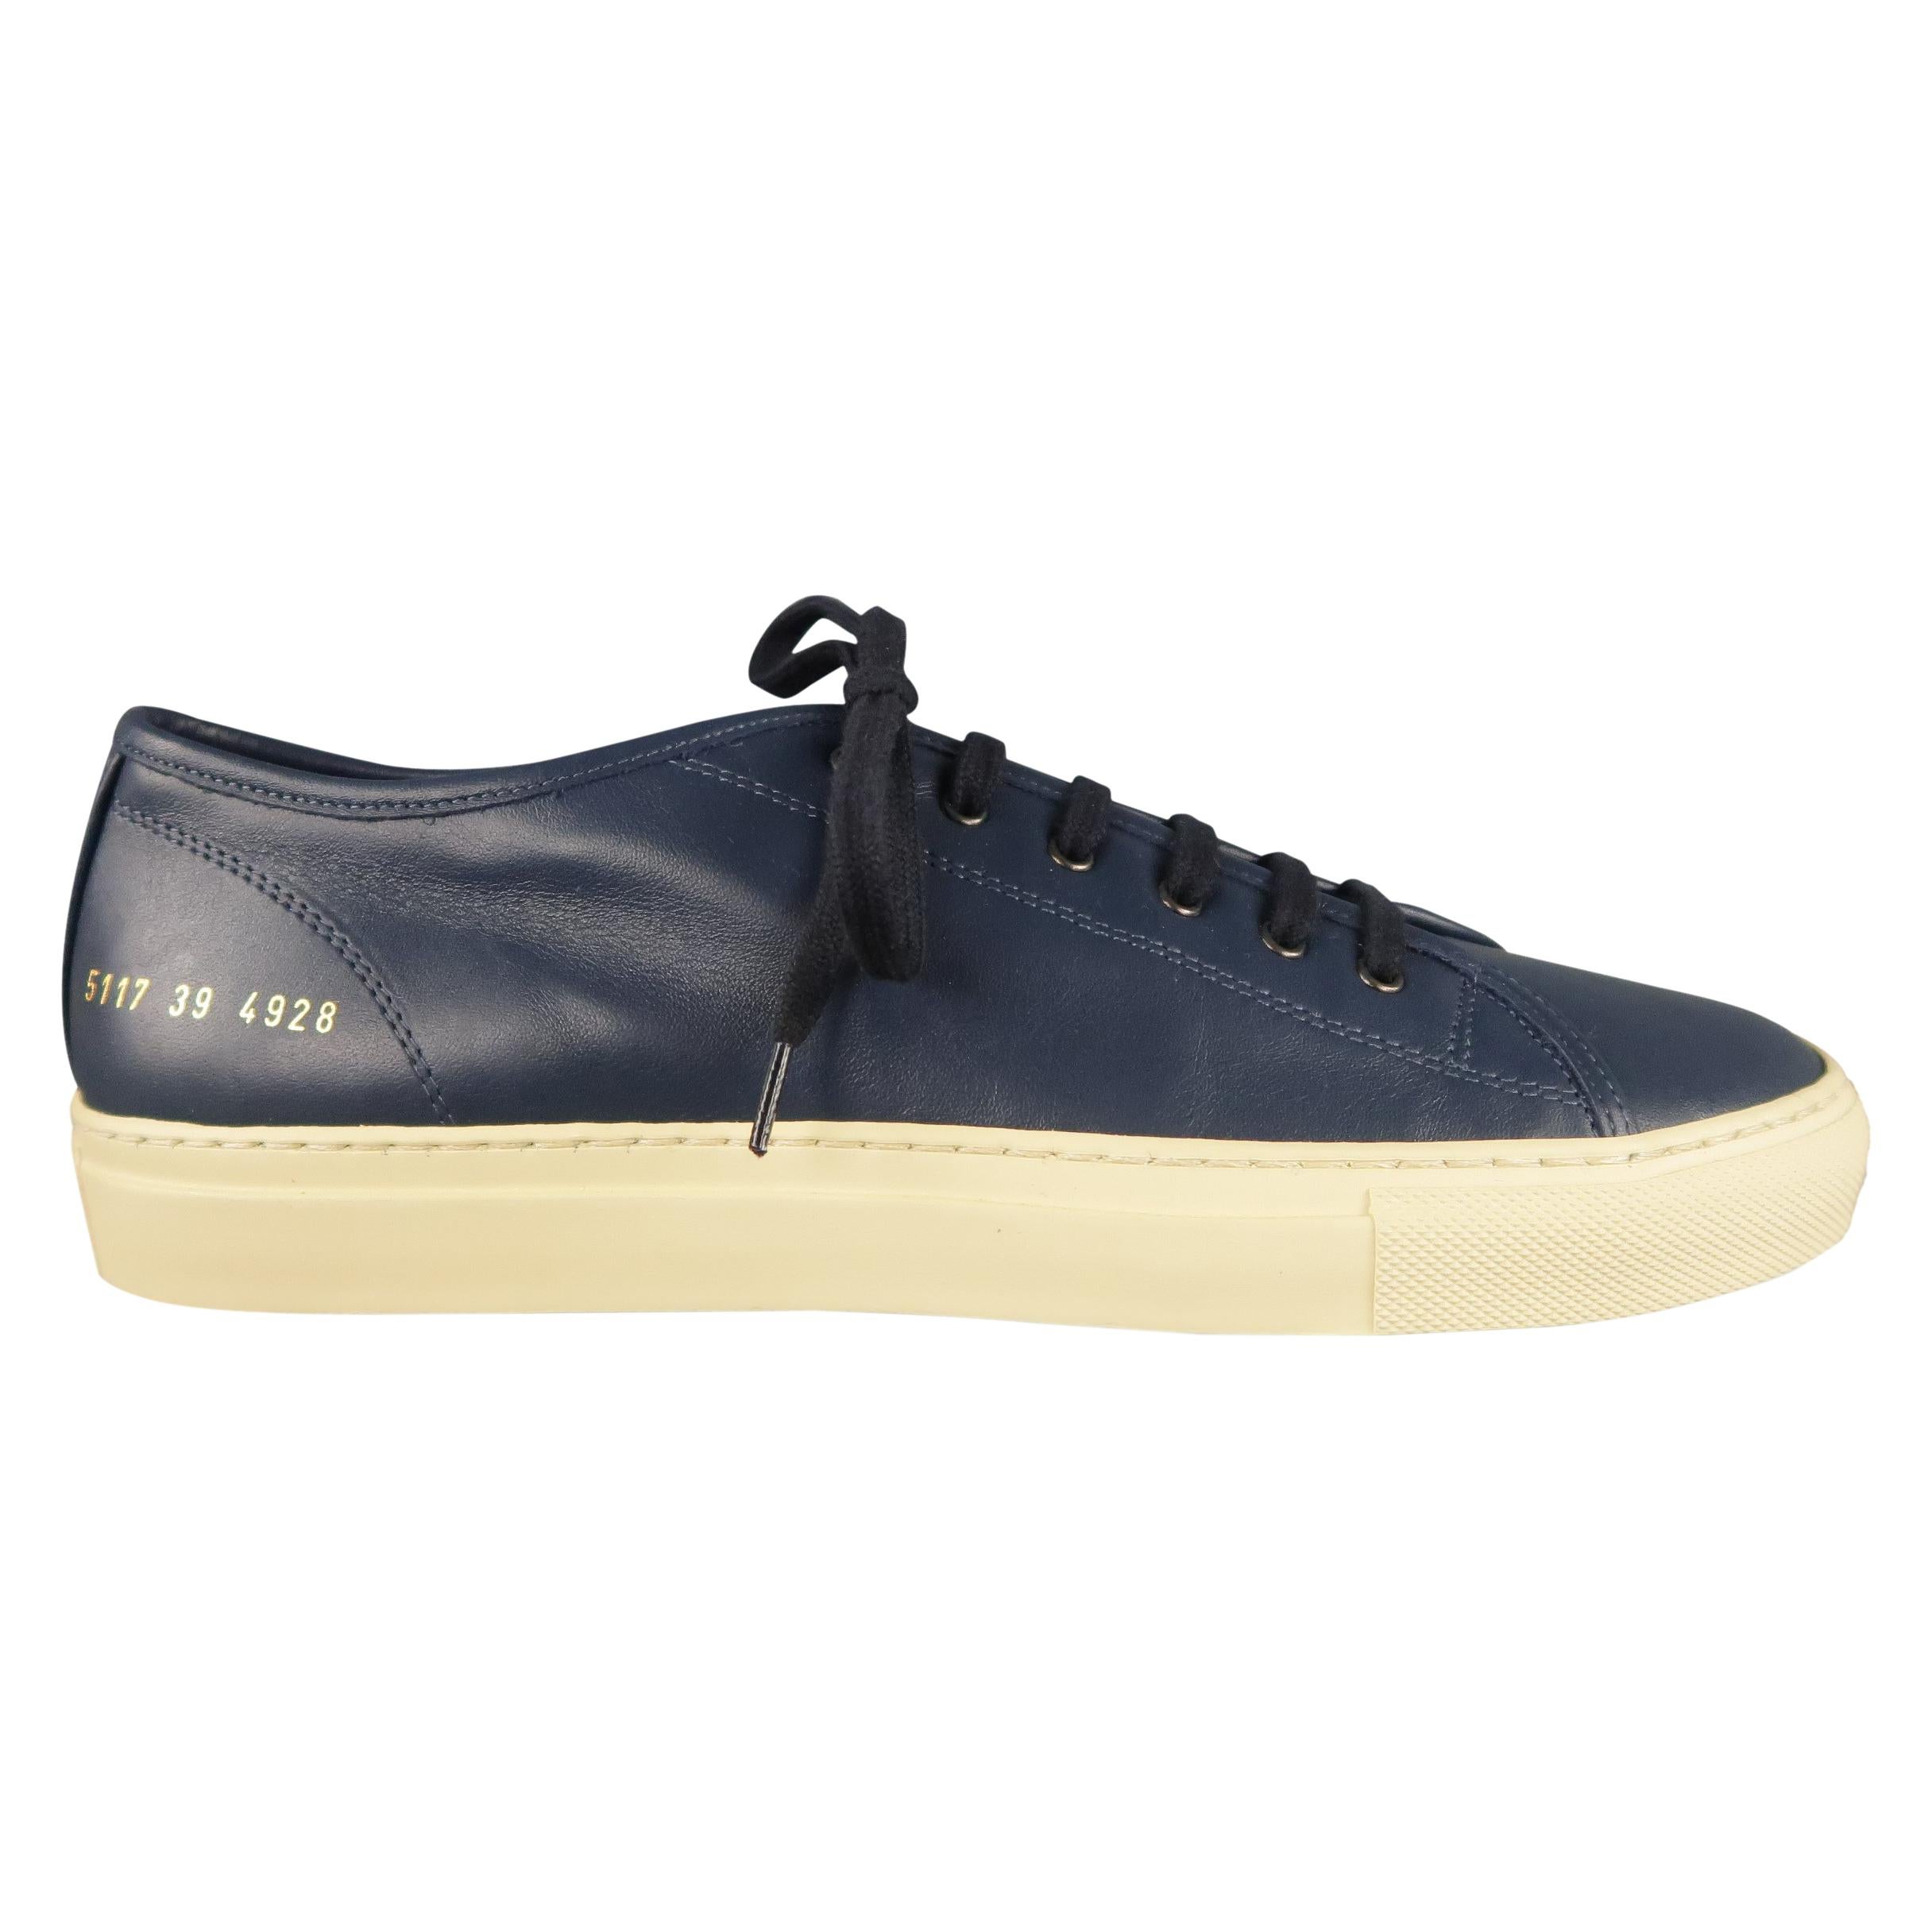 Men's COMMON PROJECTS Achilles Size 6 Navy Leather Sneakers